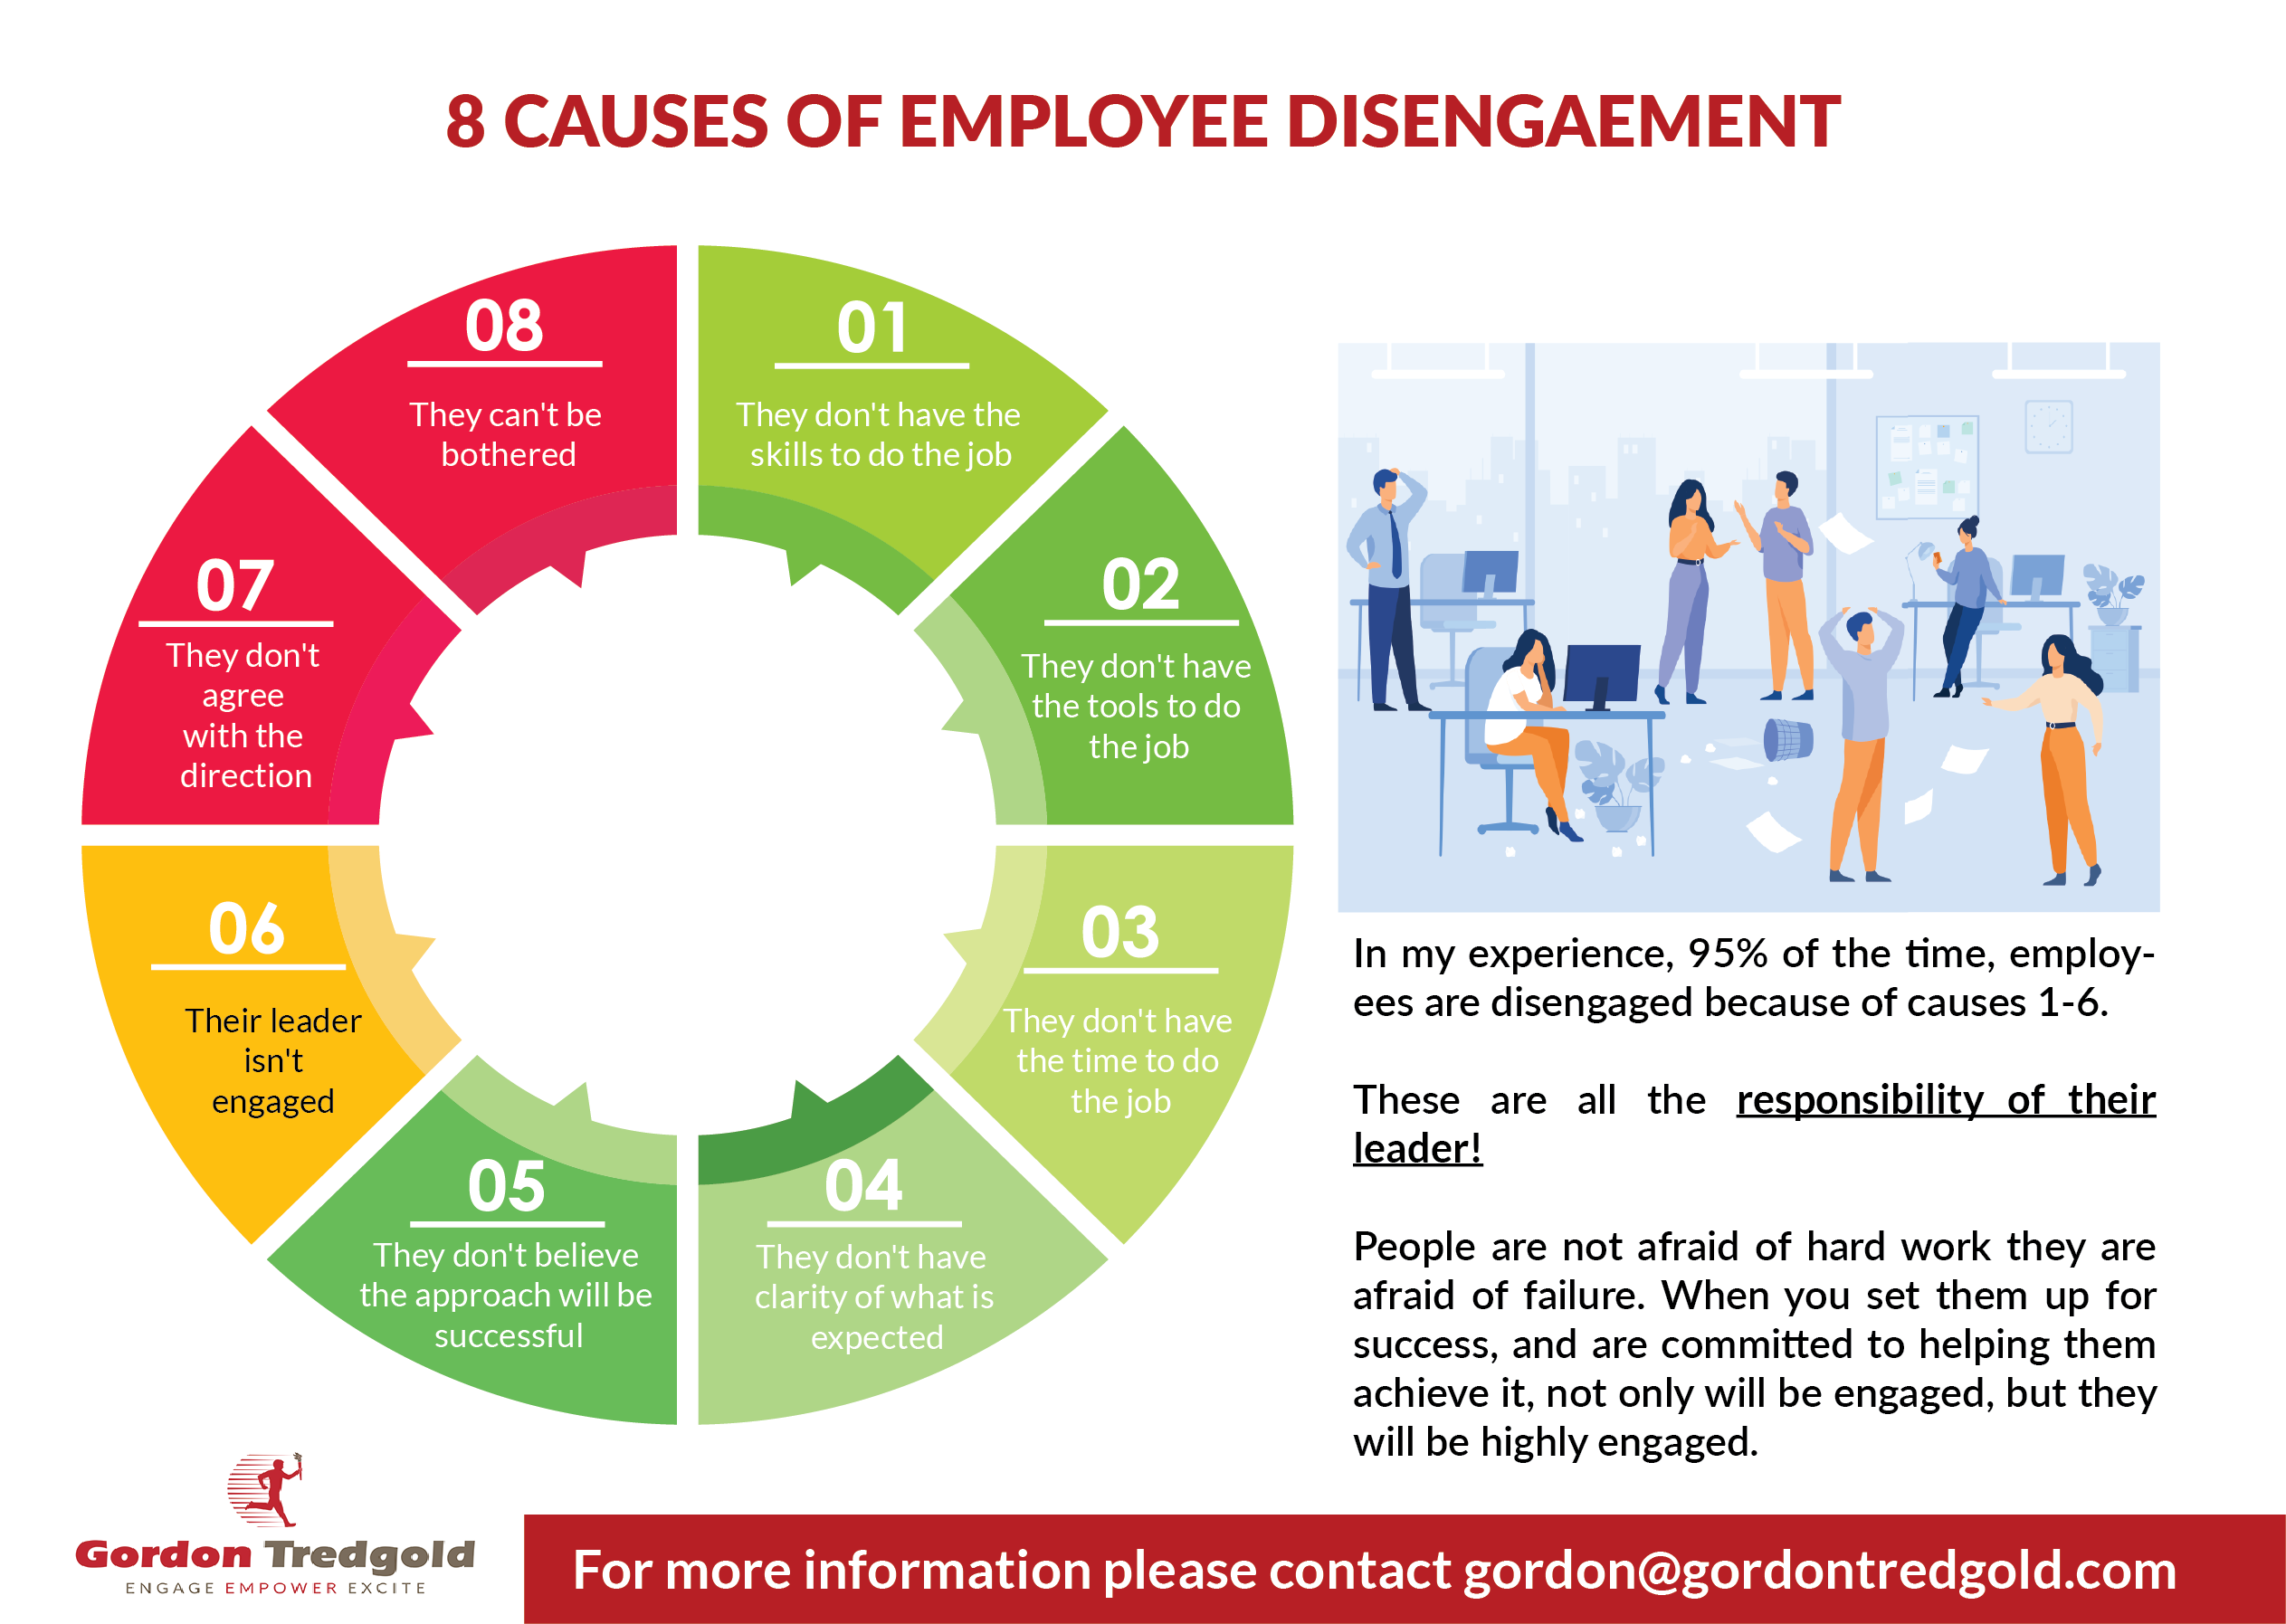 6 Reasons Why Leaders Are Accountable for Employee Engagement